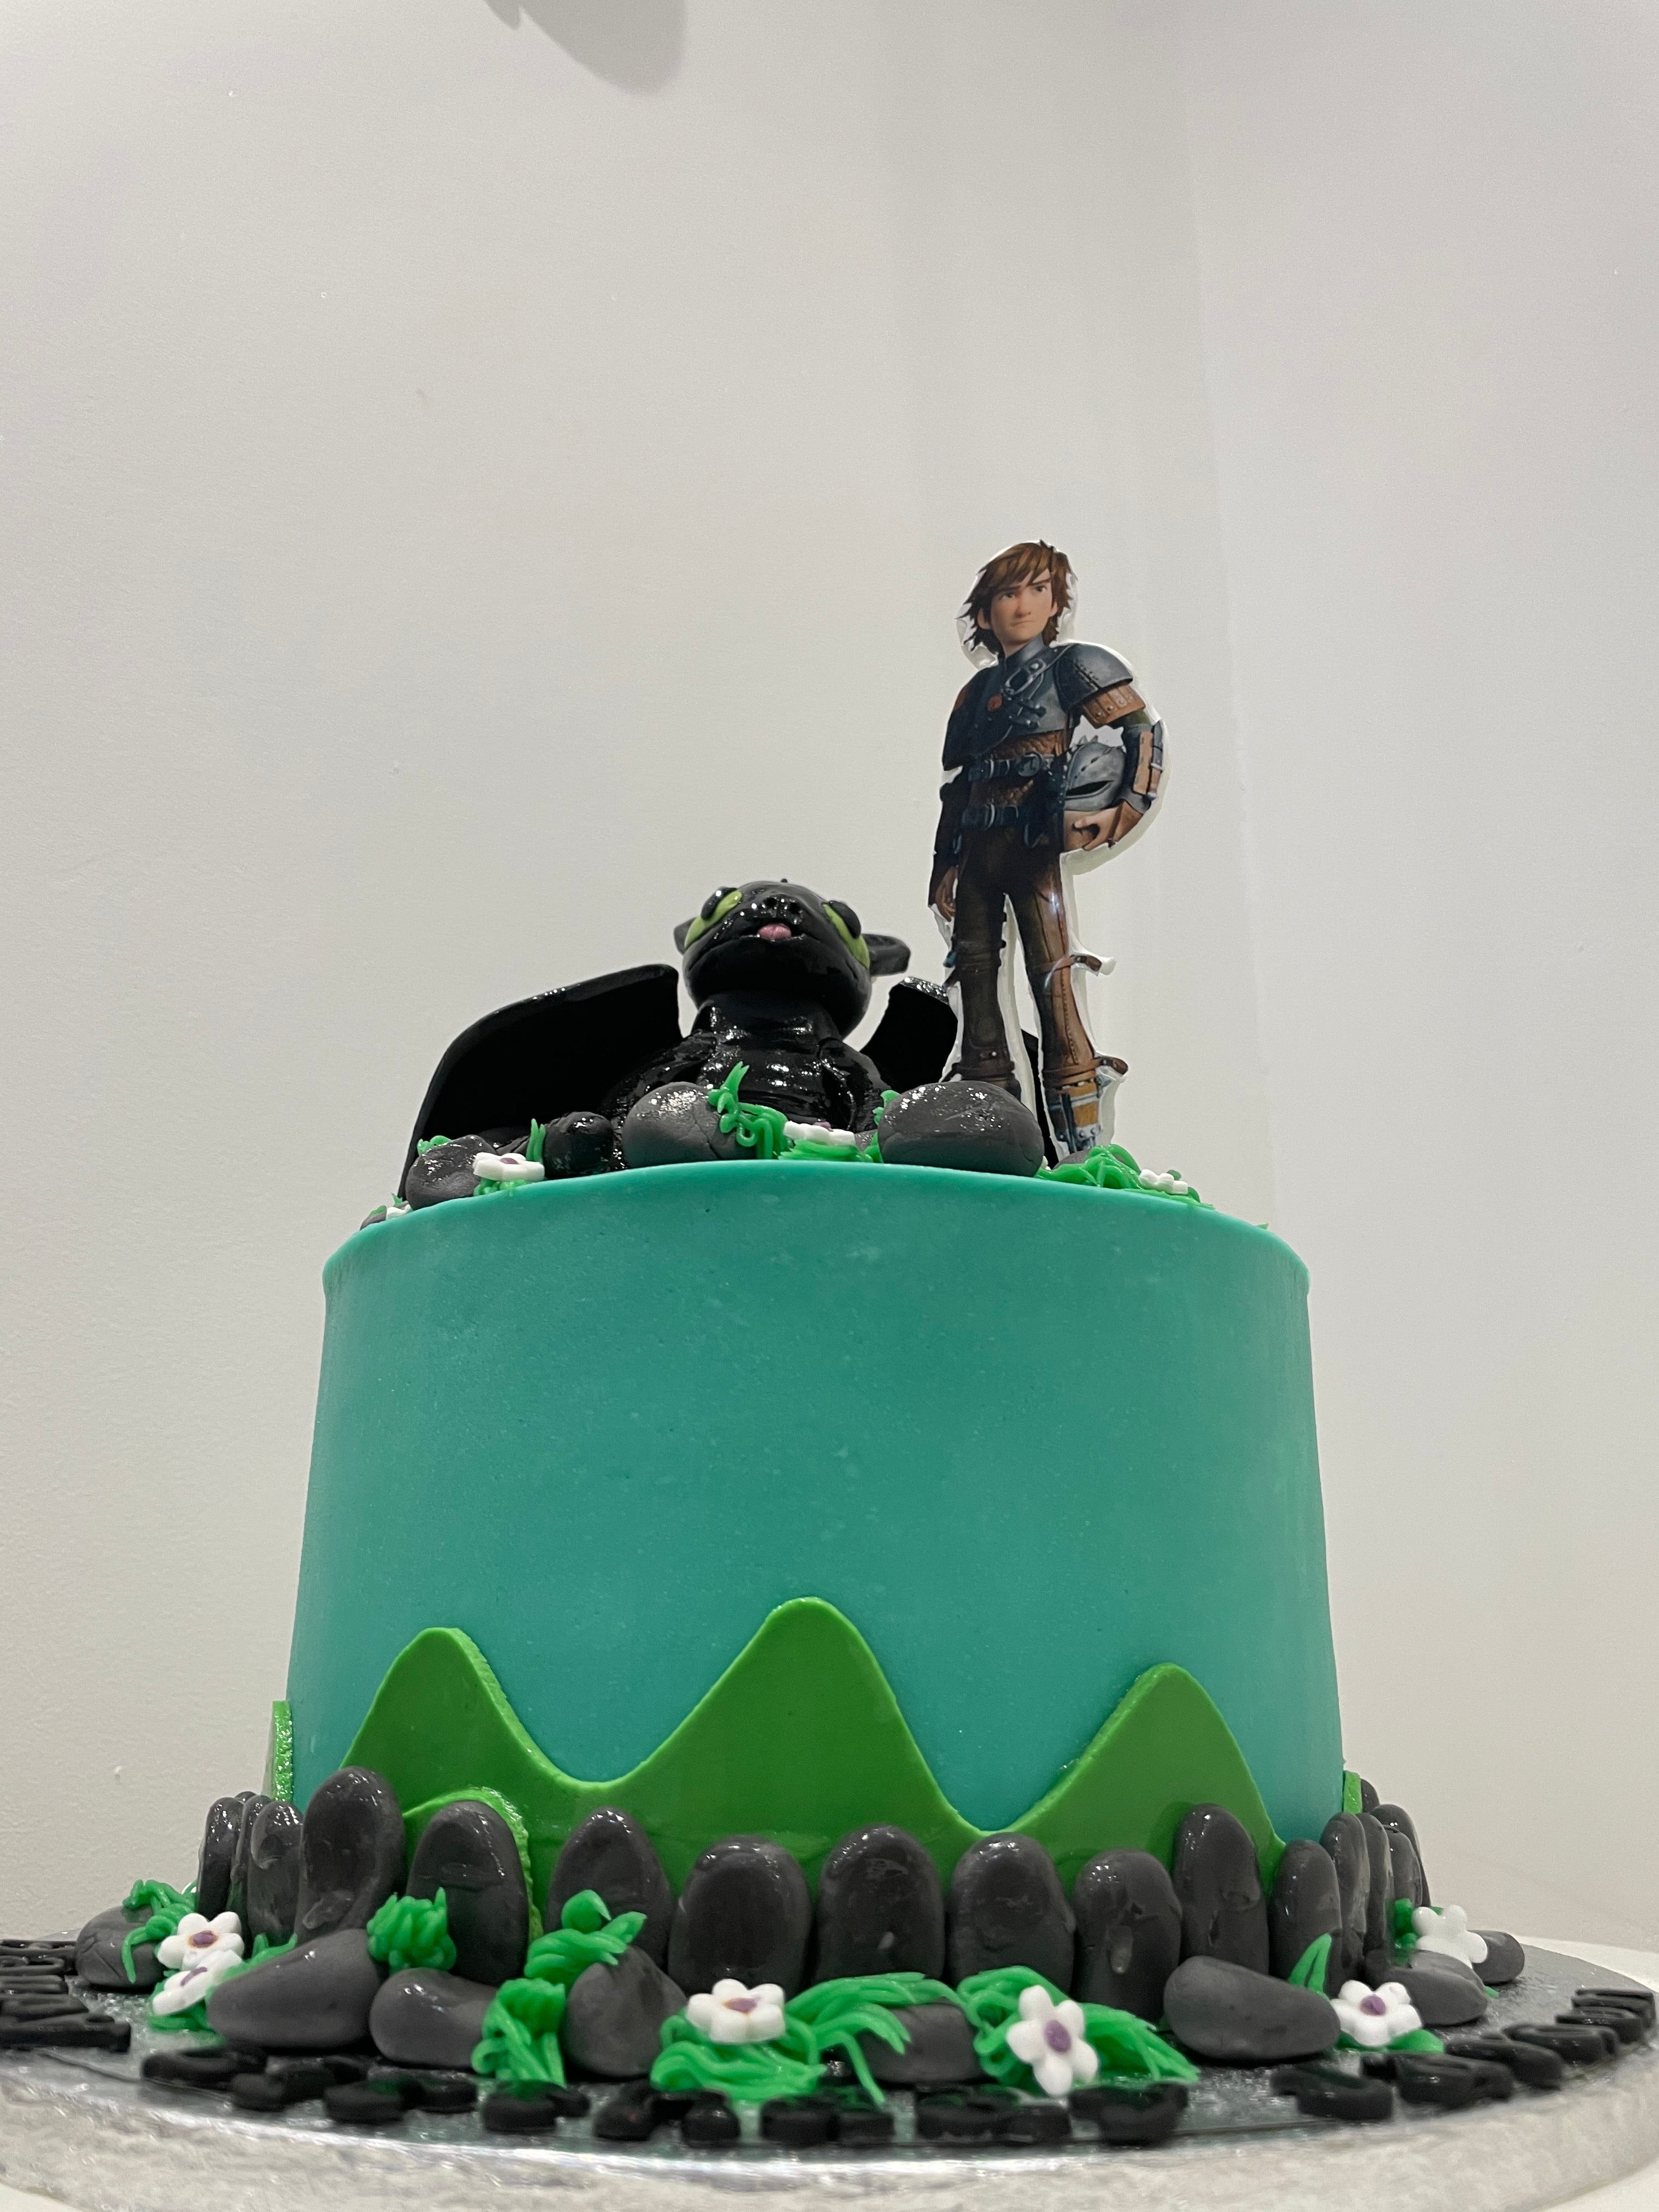 Toothless - Dragon - Decorated Cake by Mademoiselle fait - CakesDecor